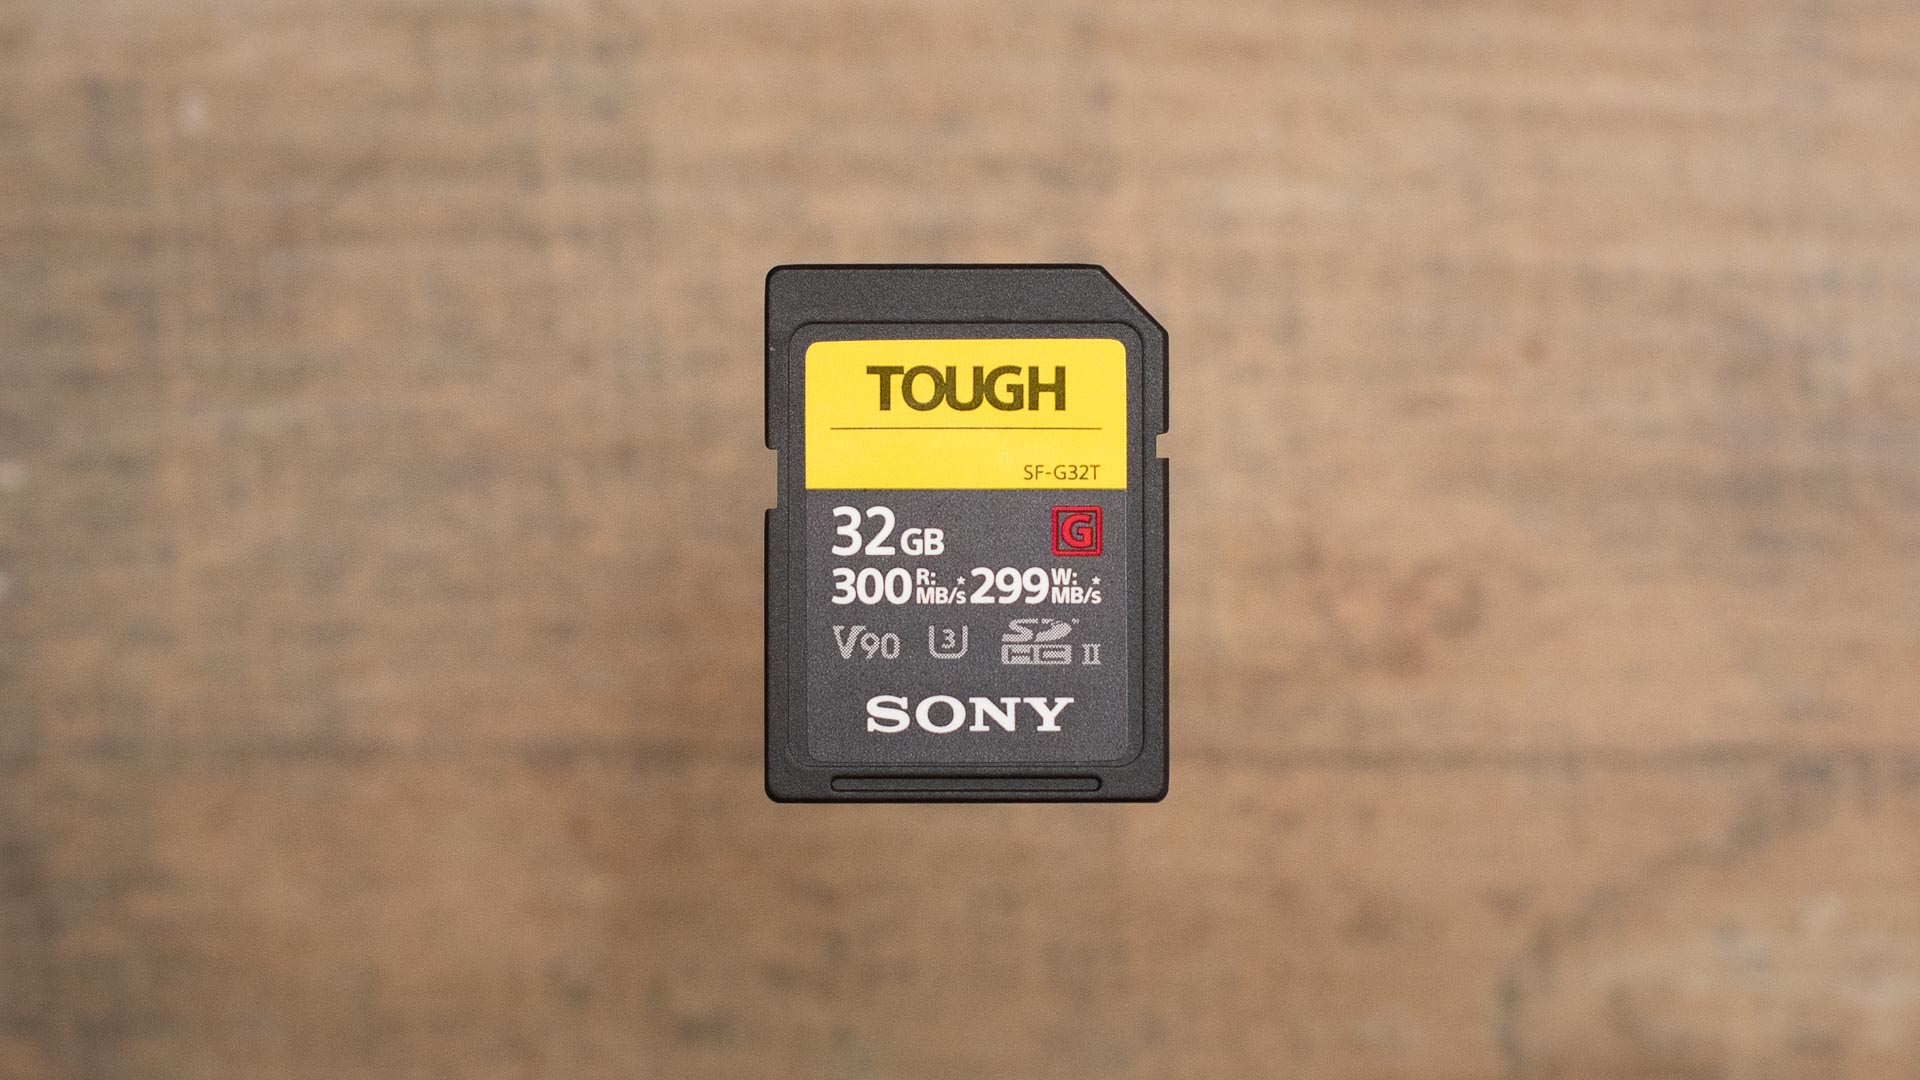 The Sony SF-G Series TOUGH UHS-II SD card on a wooden table